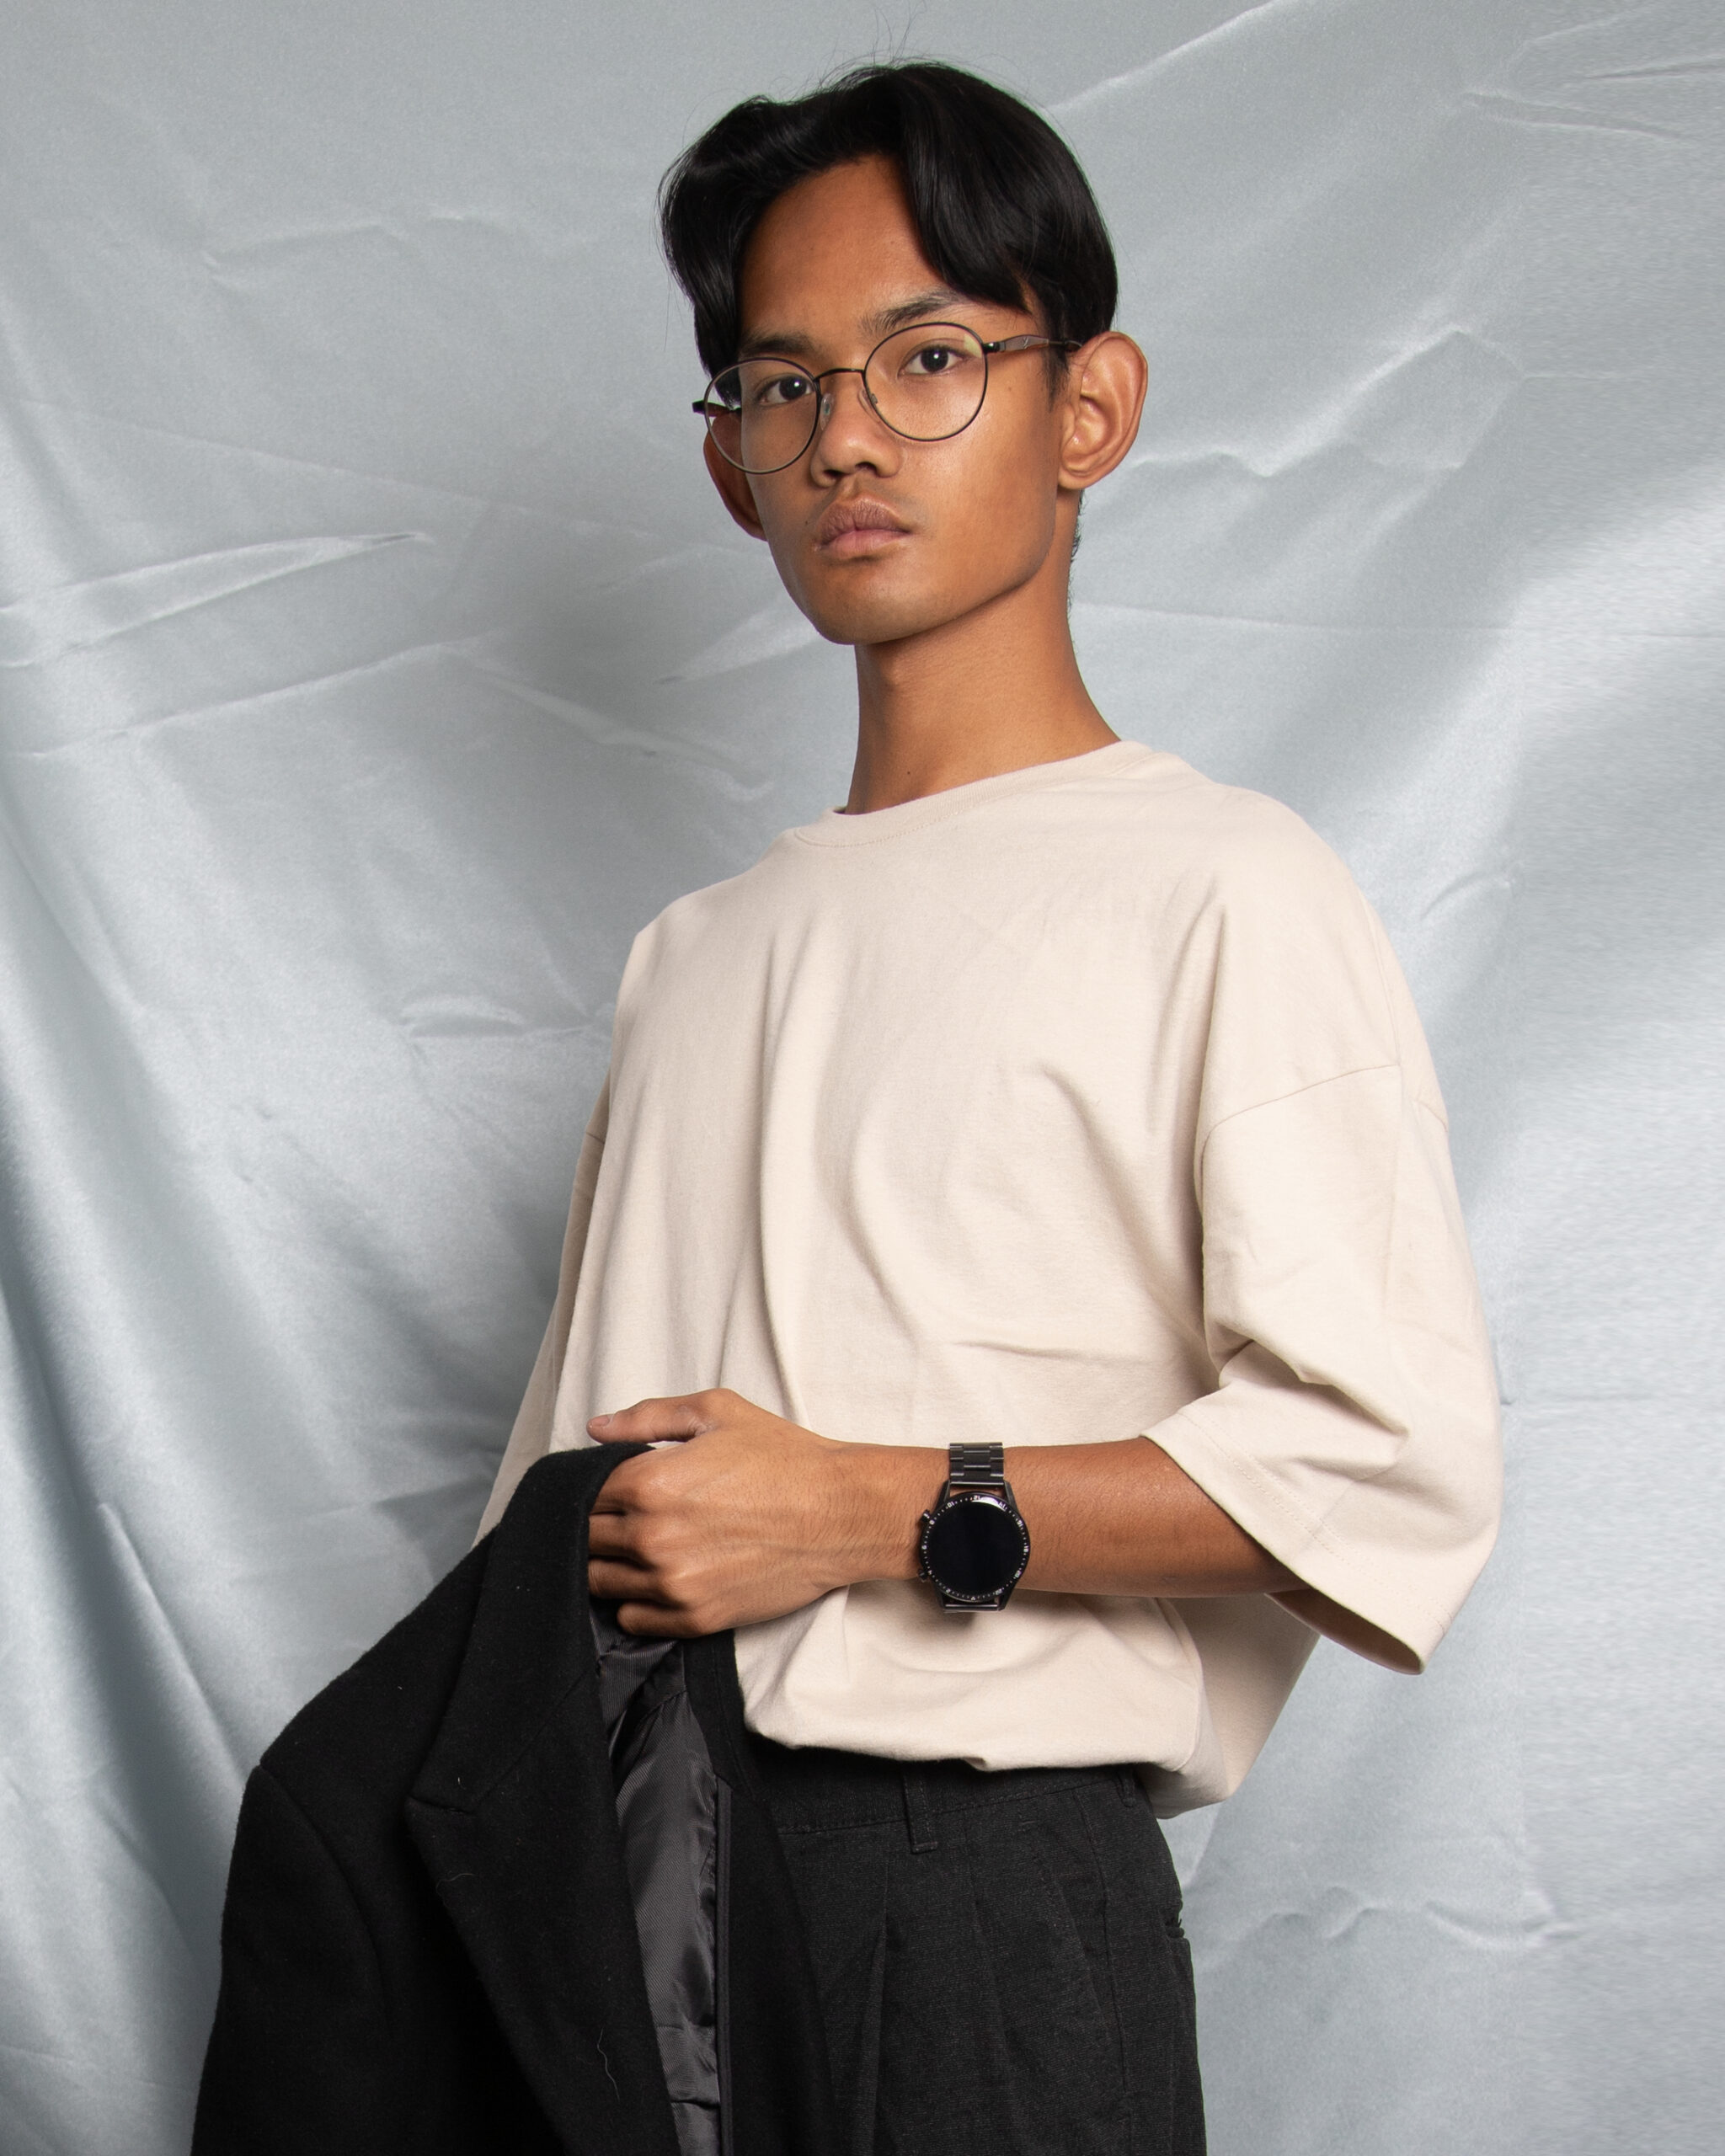 Upper body portrait photograph of of Chanphiphat Janthra, a young Thai man with glasses and short hair. He is against a satin sheet, holding his jacket.